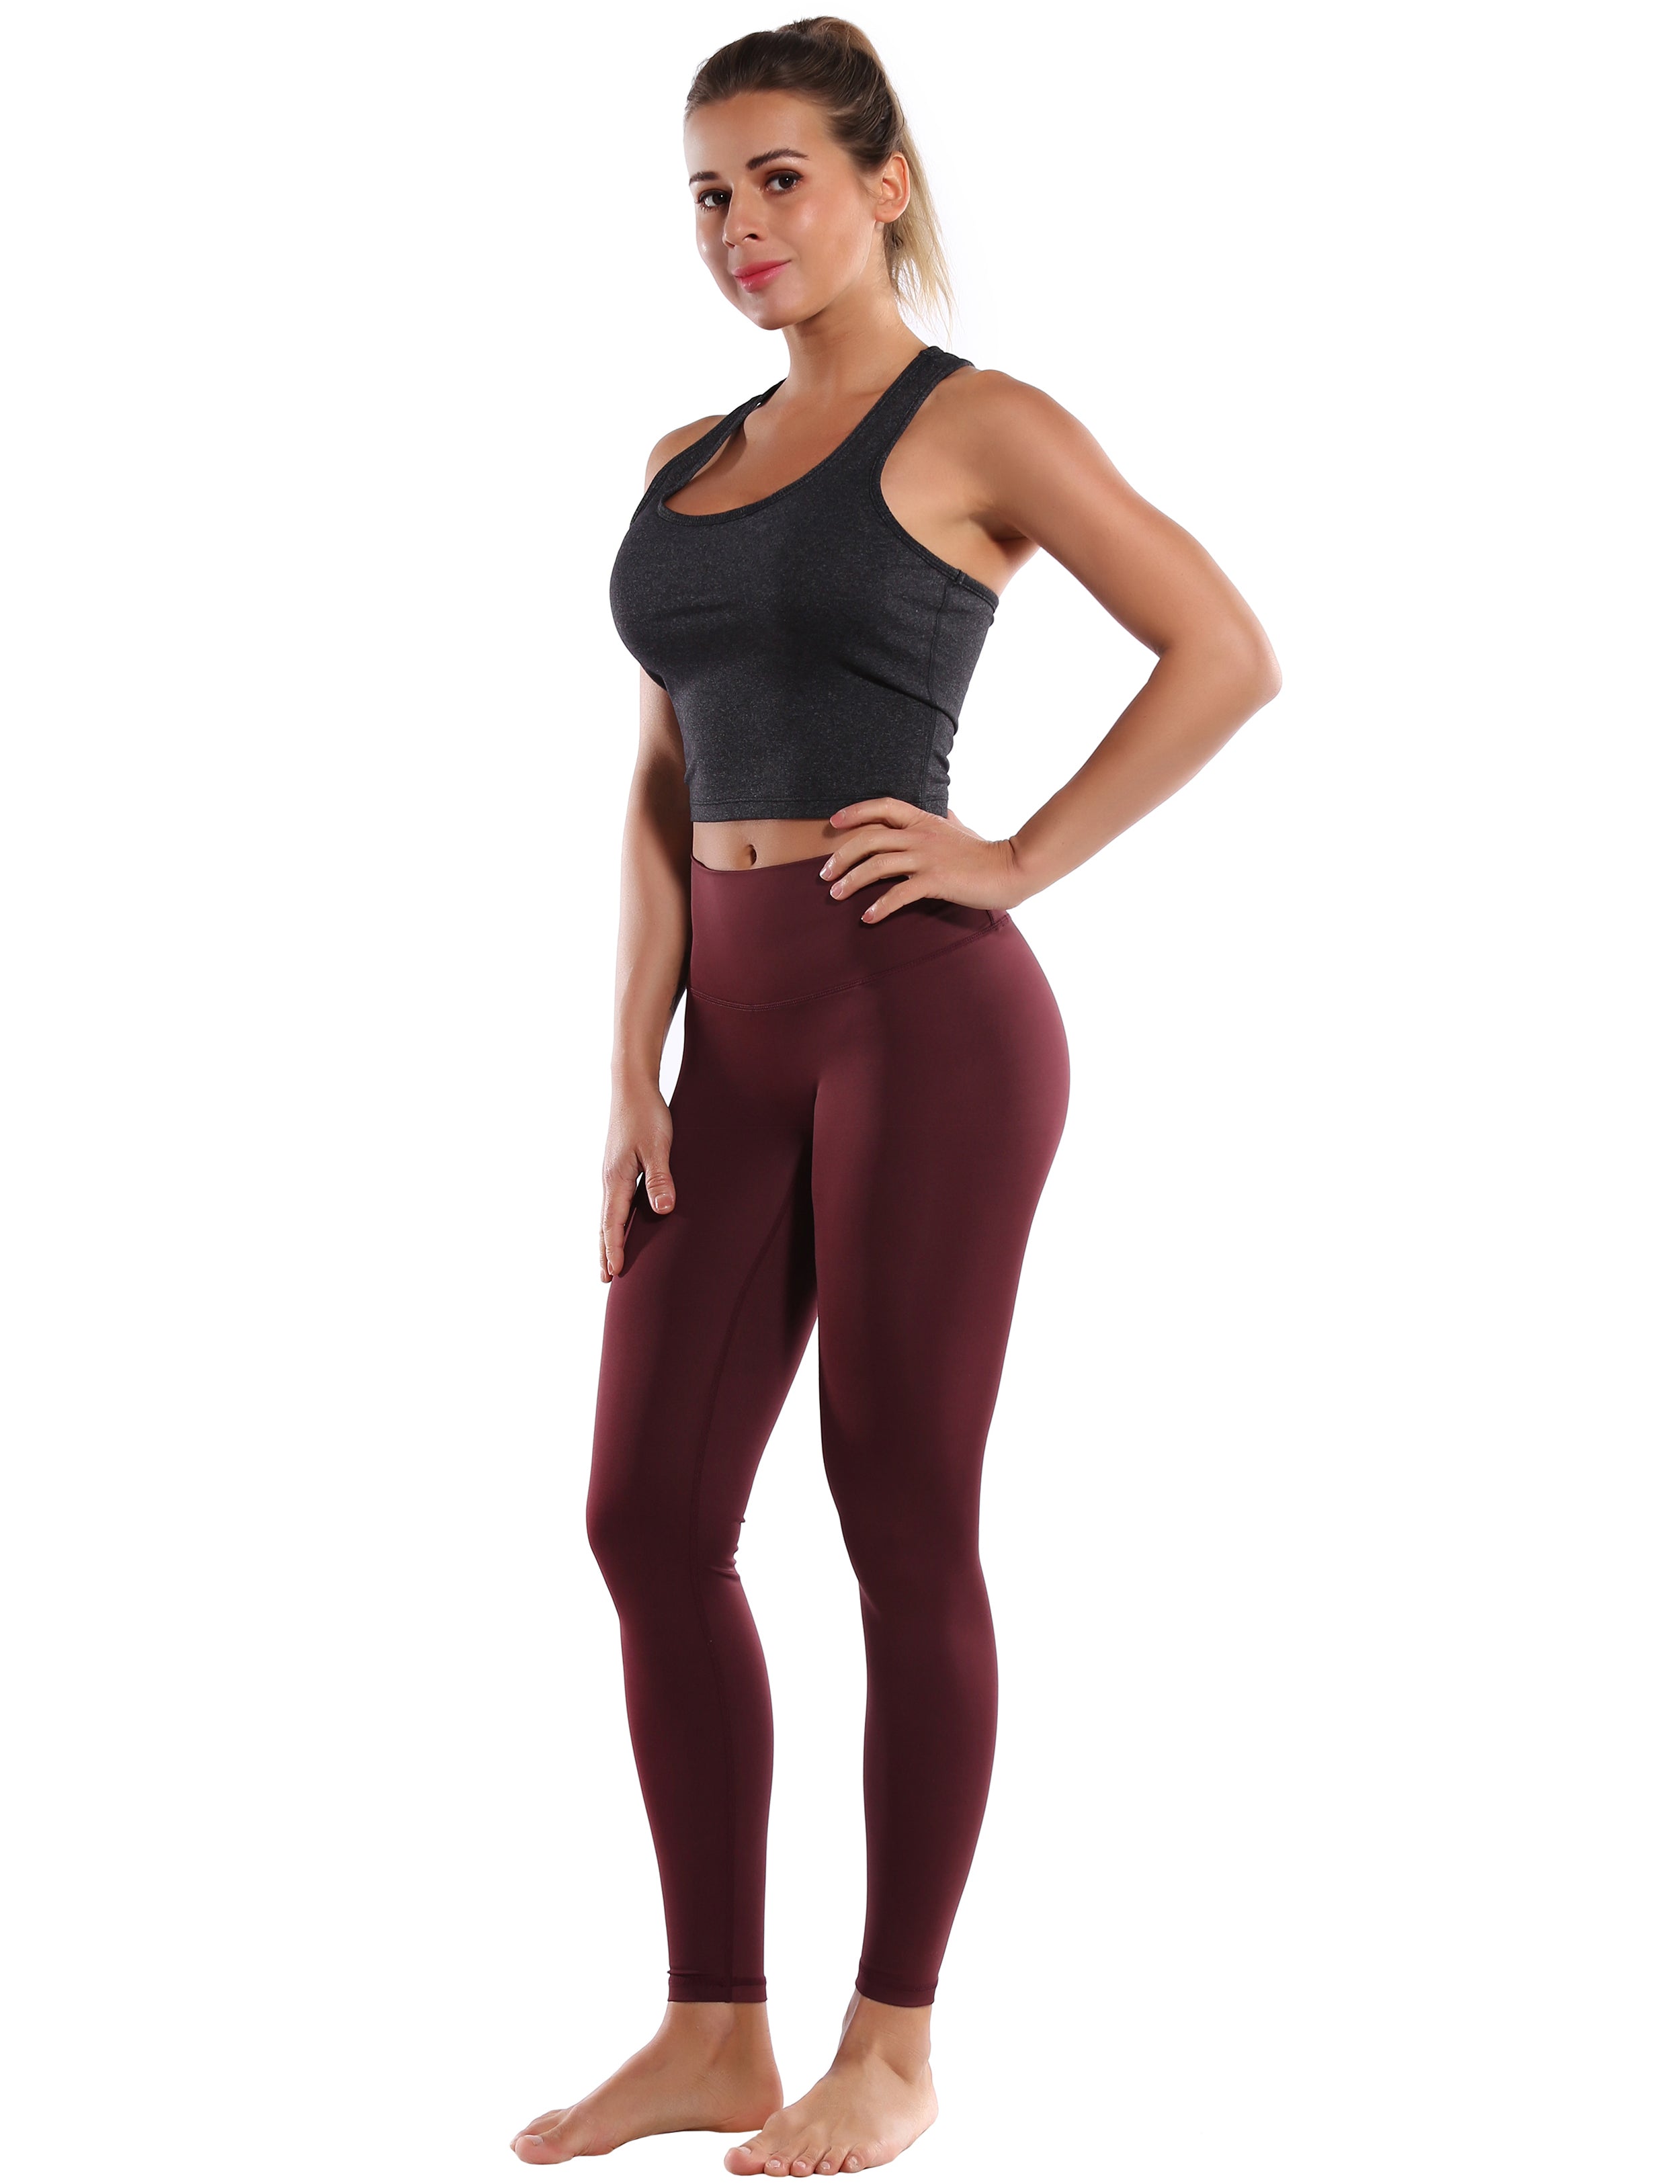 Racerback Athletic Crop Tank Tops heathercharcoal 92%Nylon/8%Spandex(Cotton Soft) Designed for Pilates Tight Fit So buttery soft, it feels weightless Sweat-wicking Four-way stretch Breathable Contours your body Sits below the waistband for moderate, everyday coverage